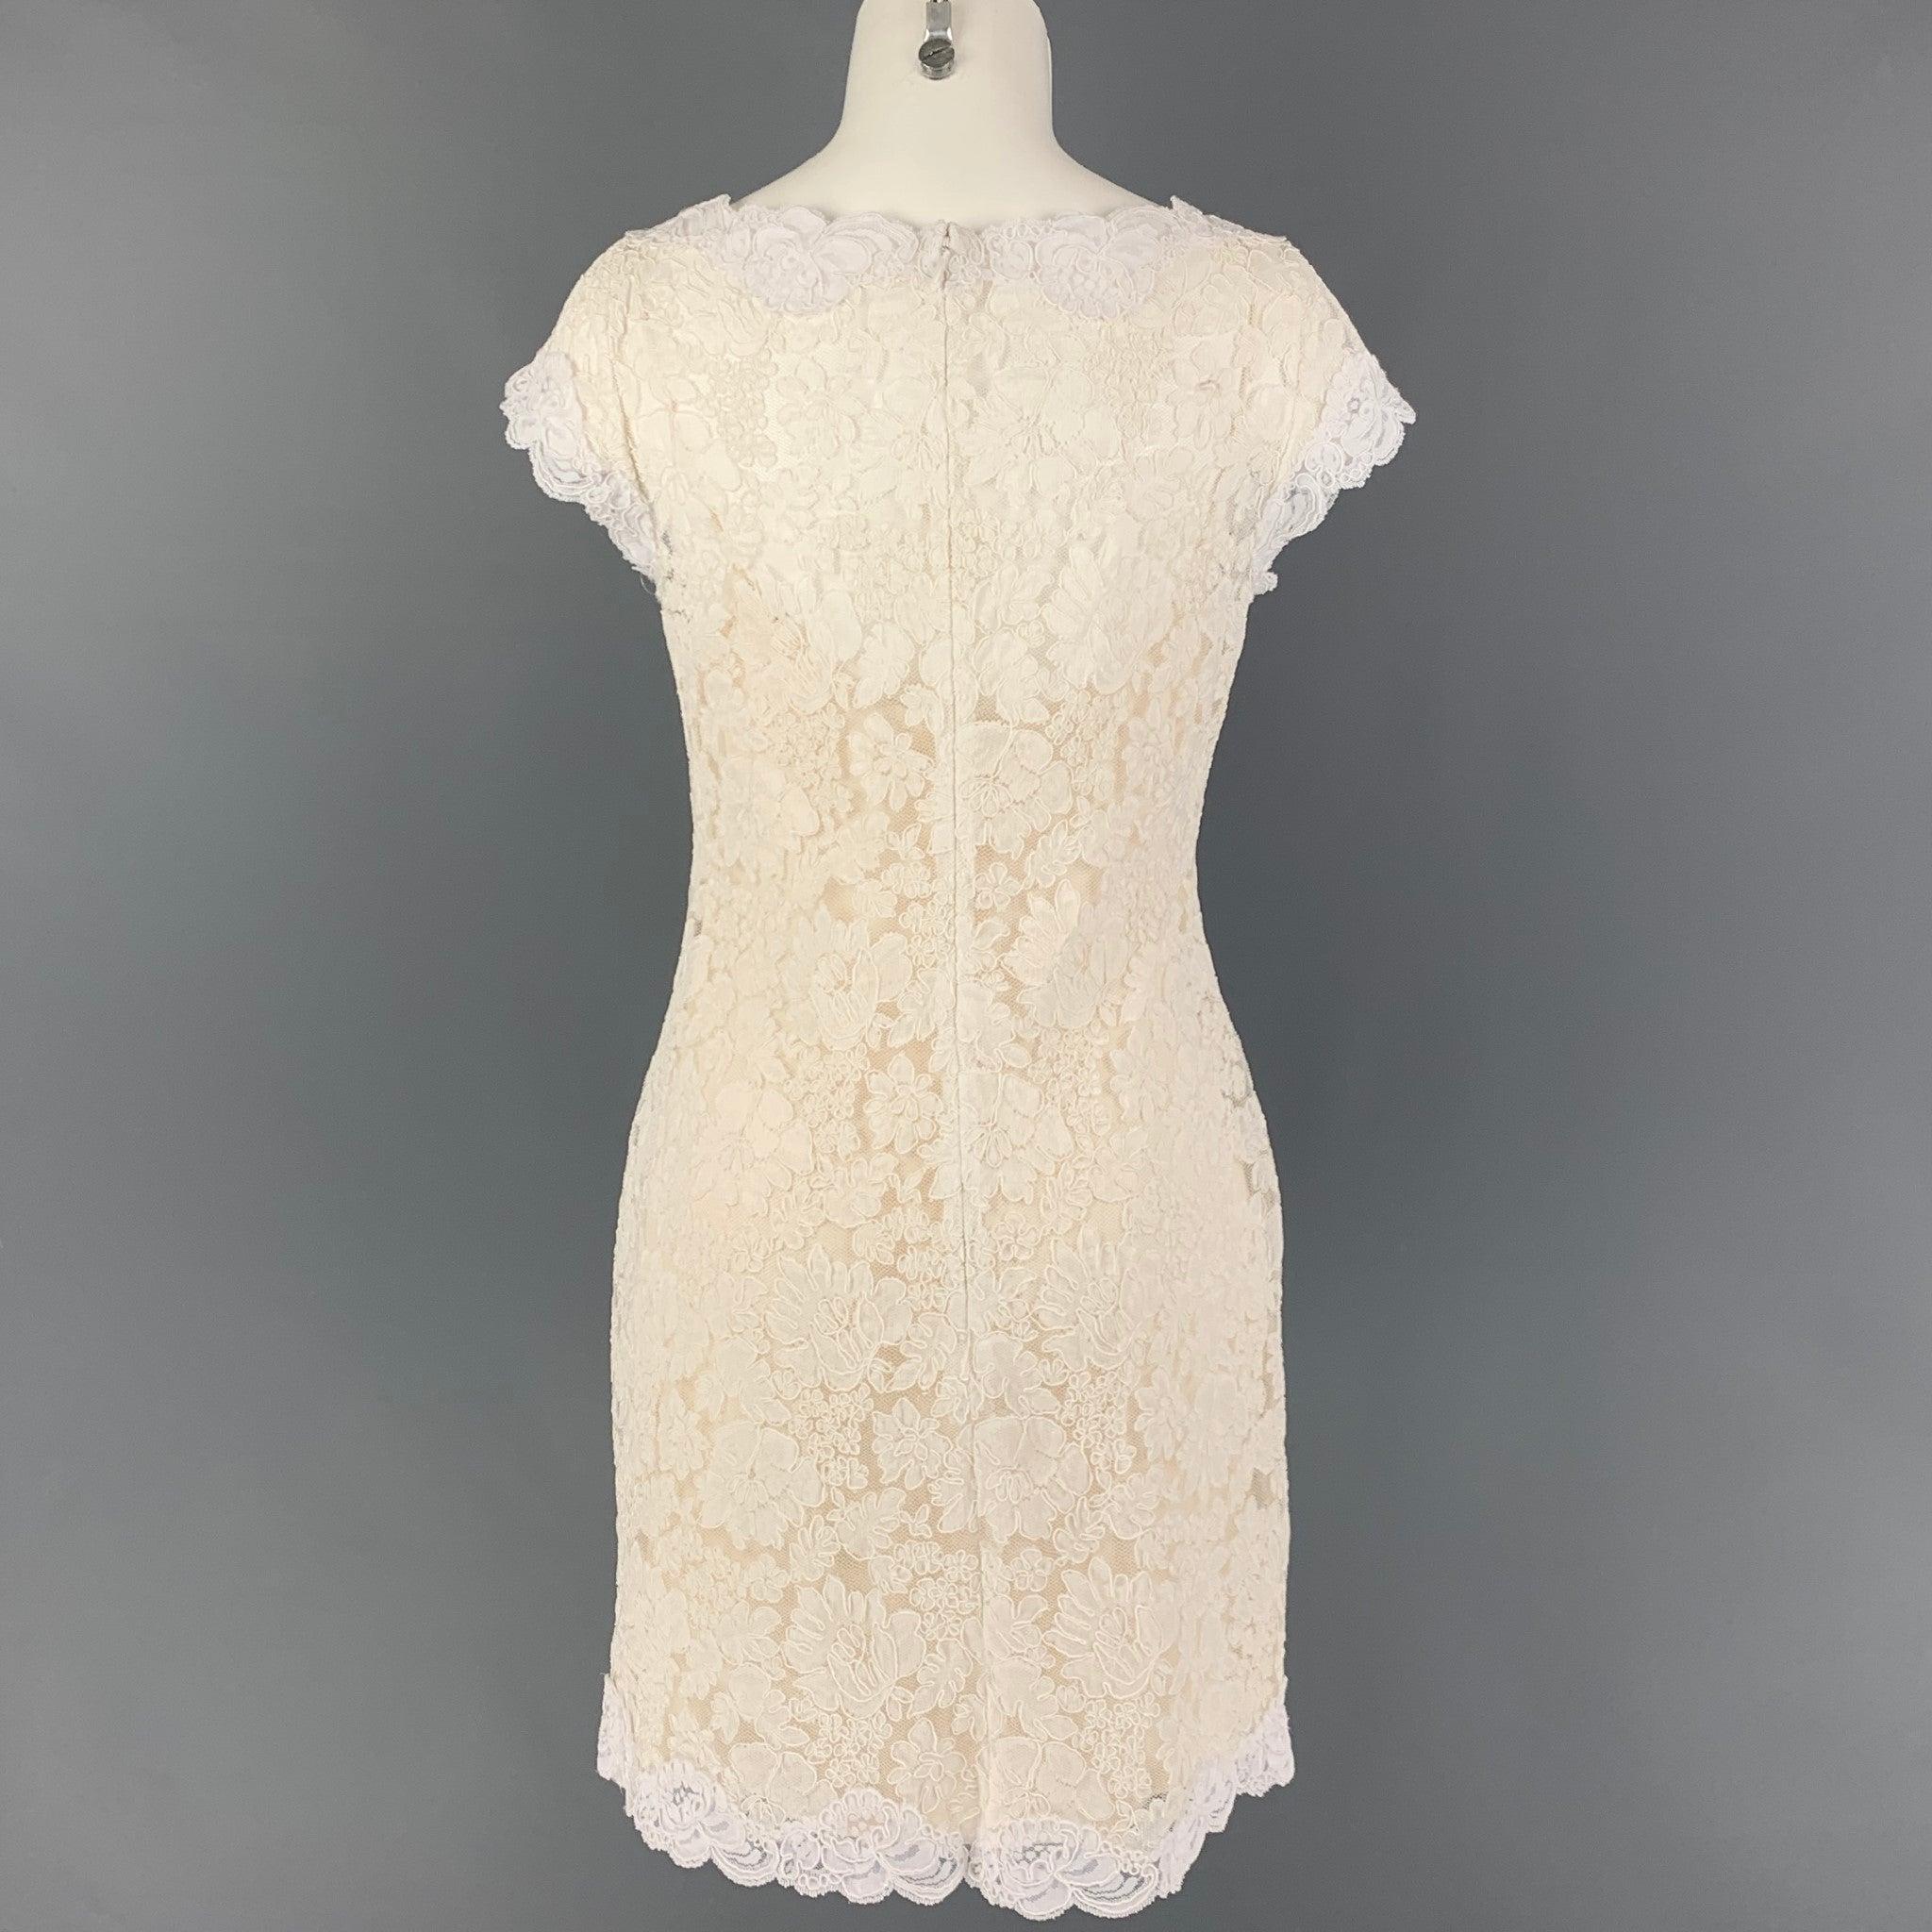 MARCHESA Size M White Cream Floral Sheath Dress In Good Condition For Sale In San Francisco, CA